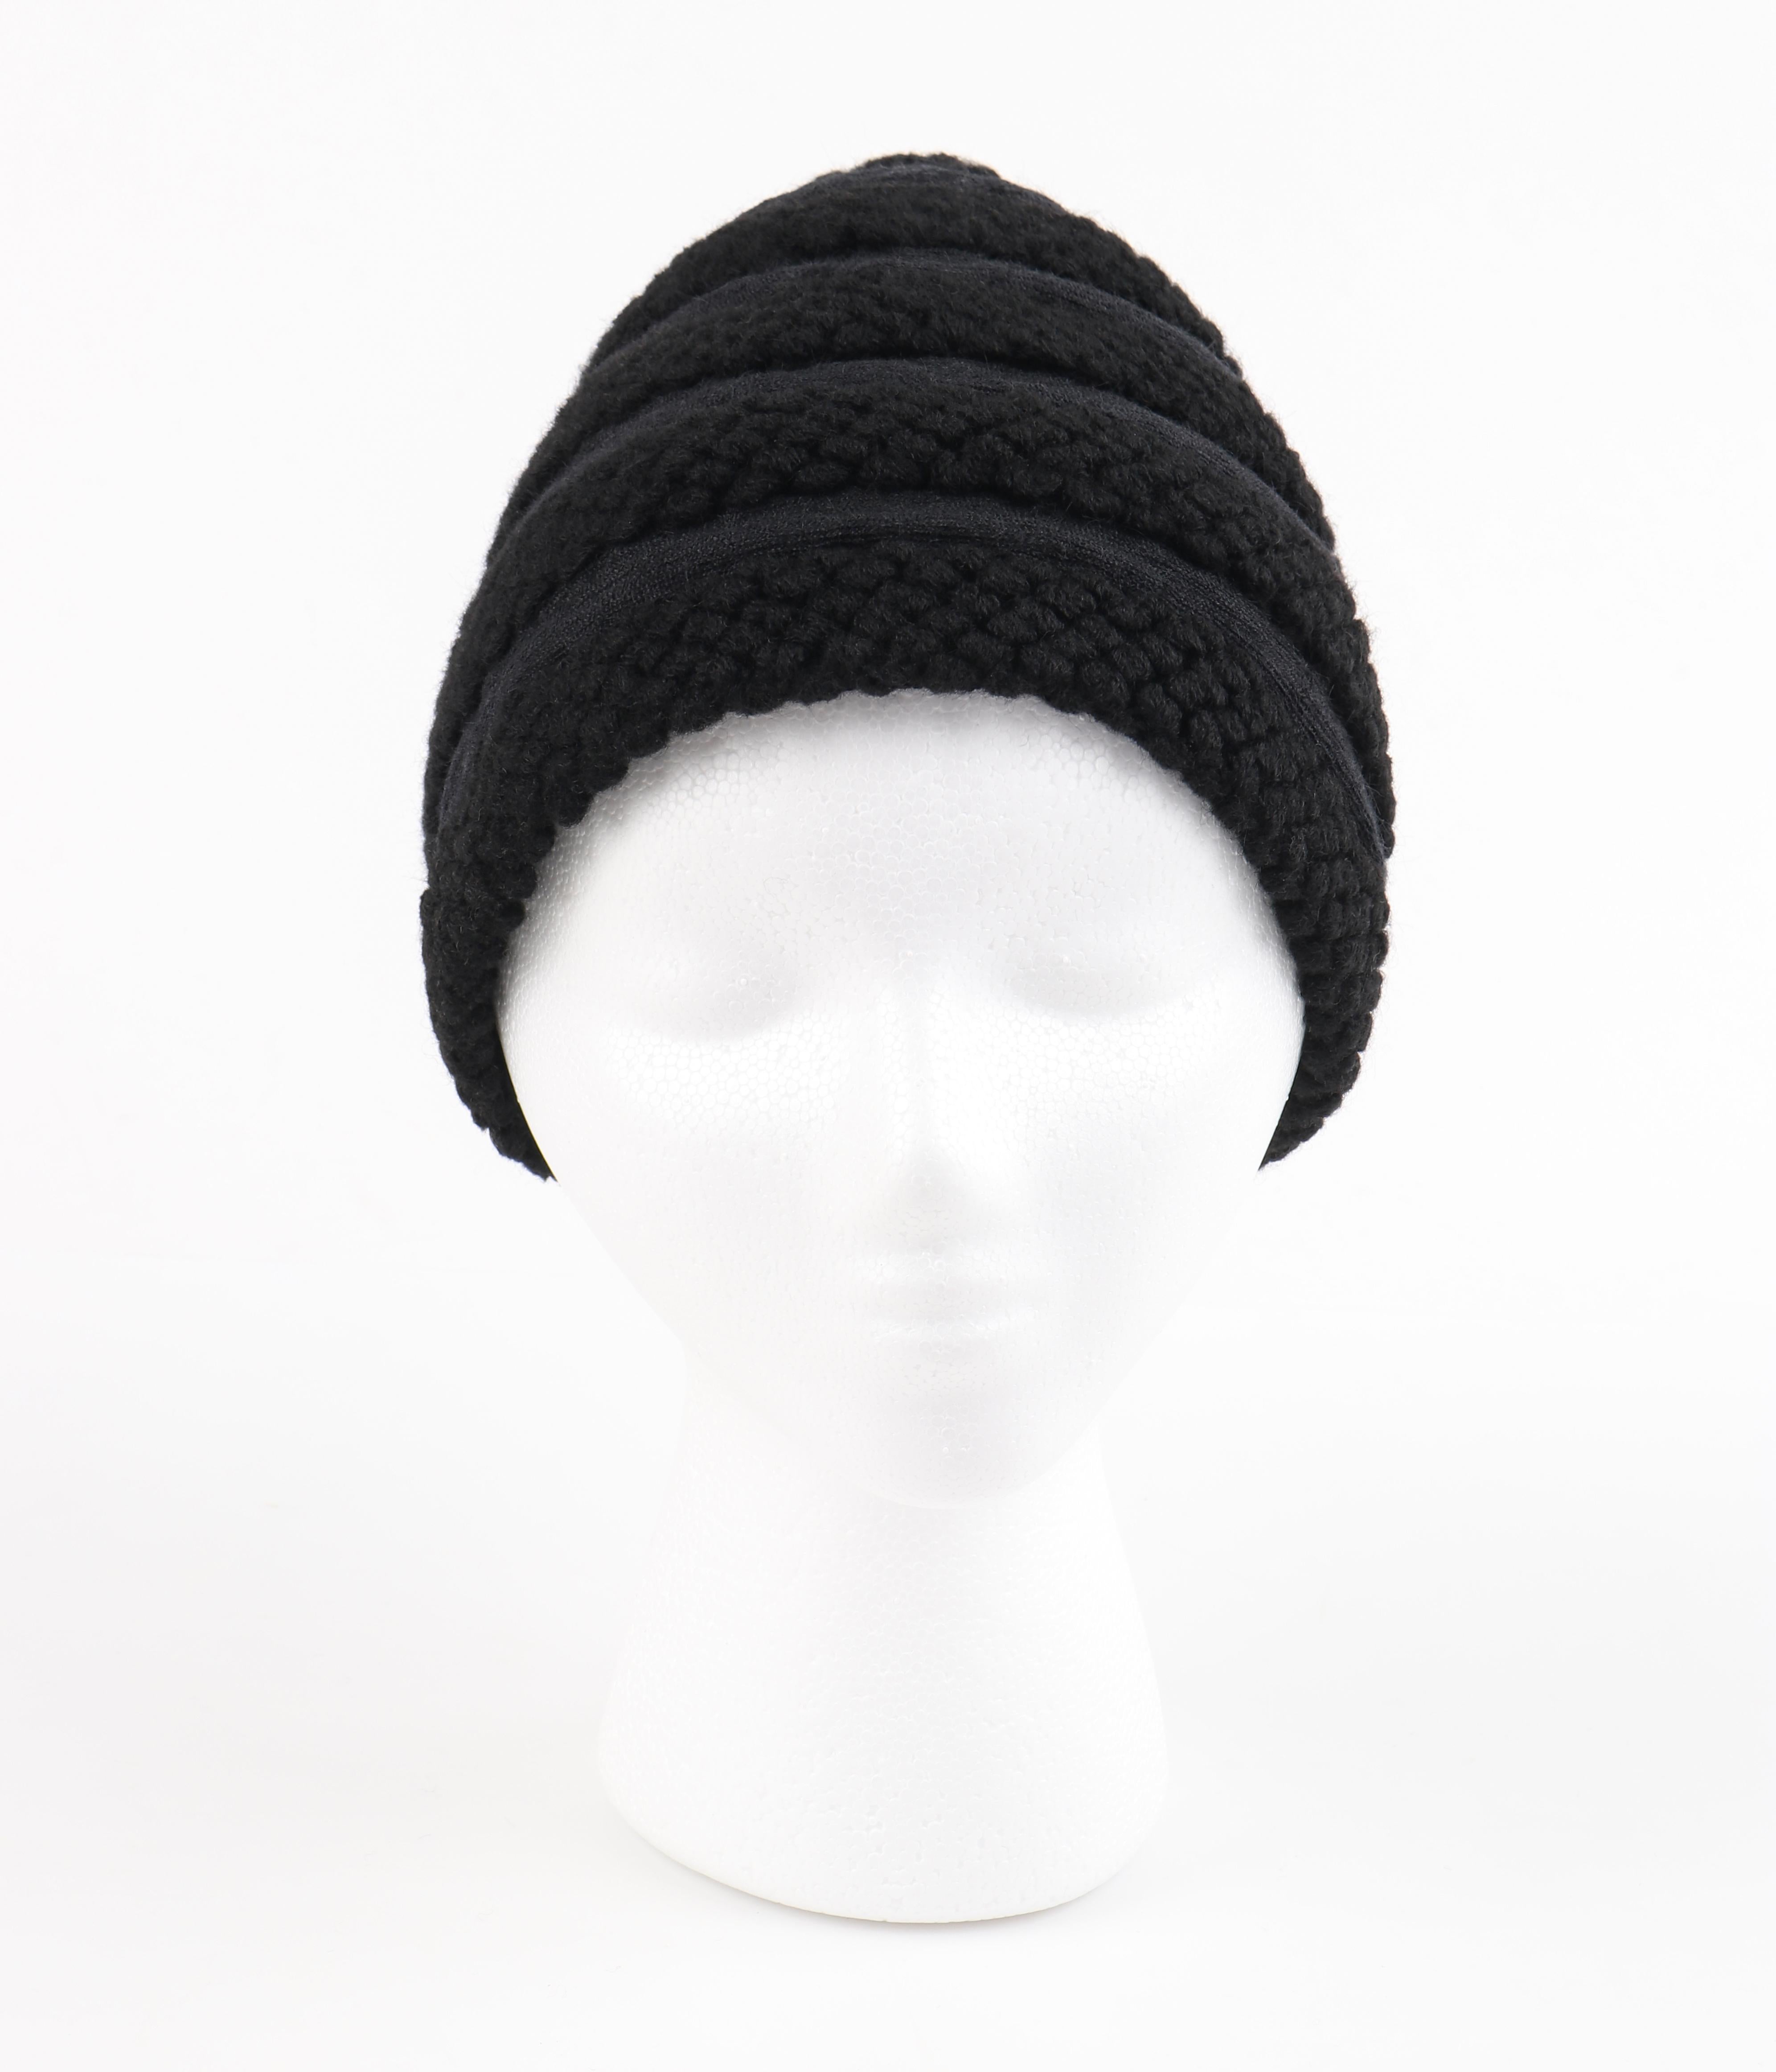 CHRISTIAN DIOR Early c.1960’s Couture Black Crochet Knit Layered Cap Hat 
 
Circa: Early 1960’s
Label(s): Christian Dior / New York
Style: Knit Hat
Color(s): Black
Lined: Yes 
Unmarked Fabric Content: Wool
Additional Details / Inclusions: Black